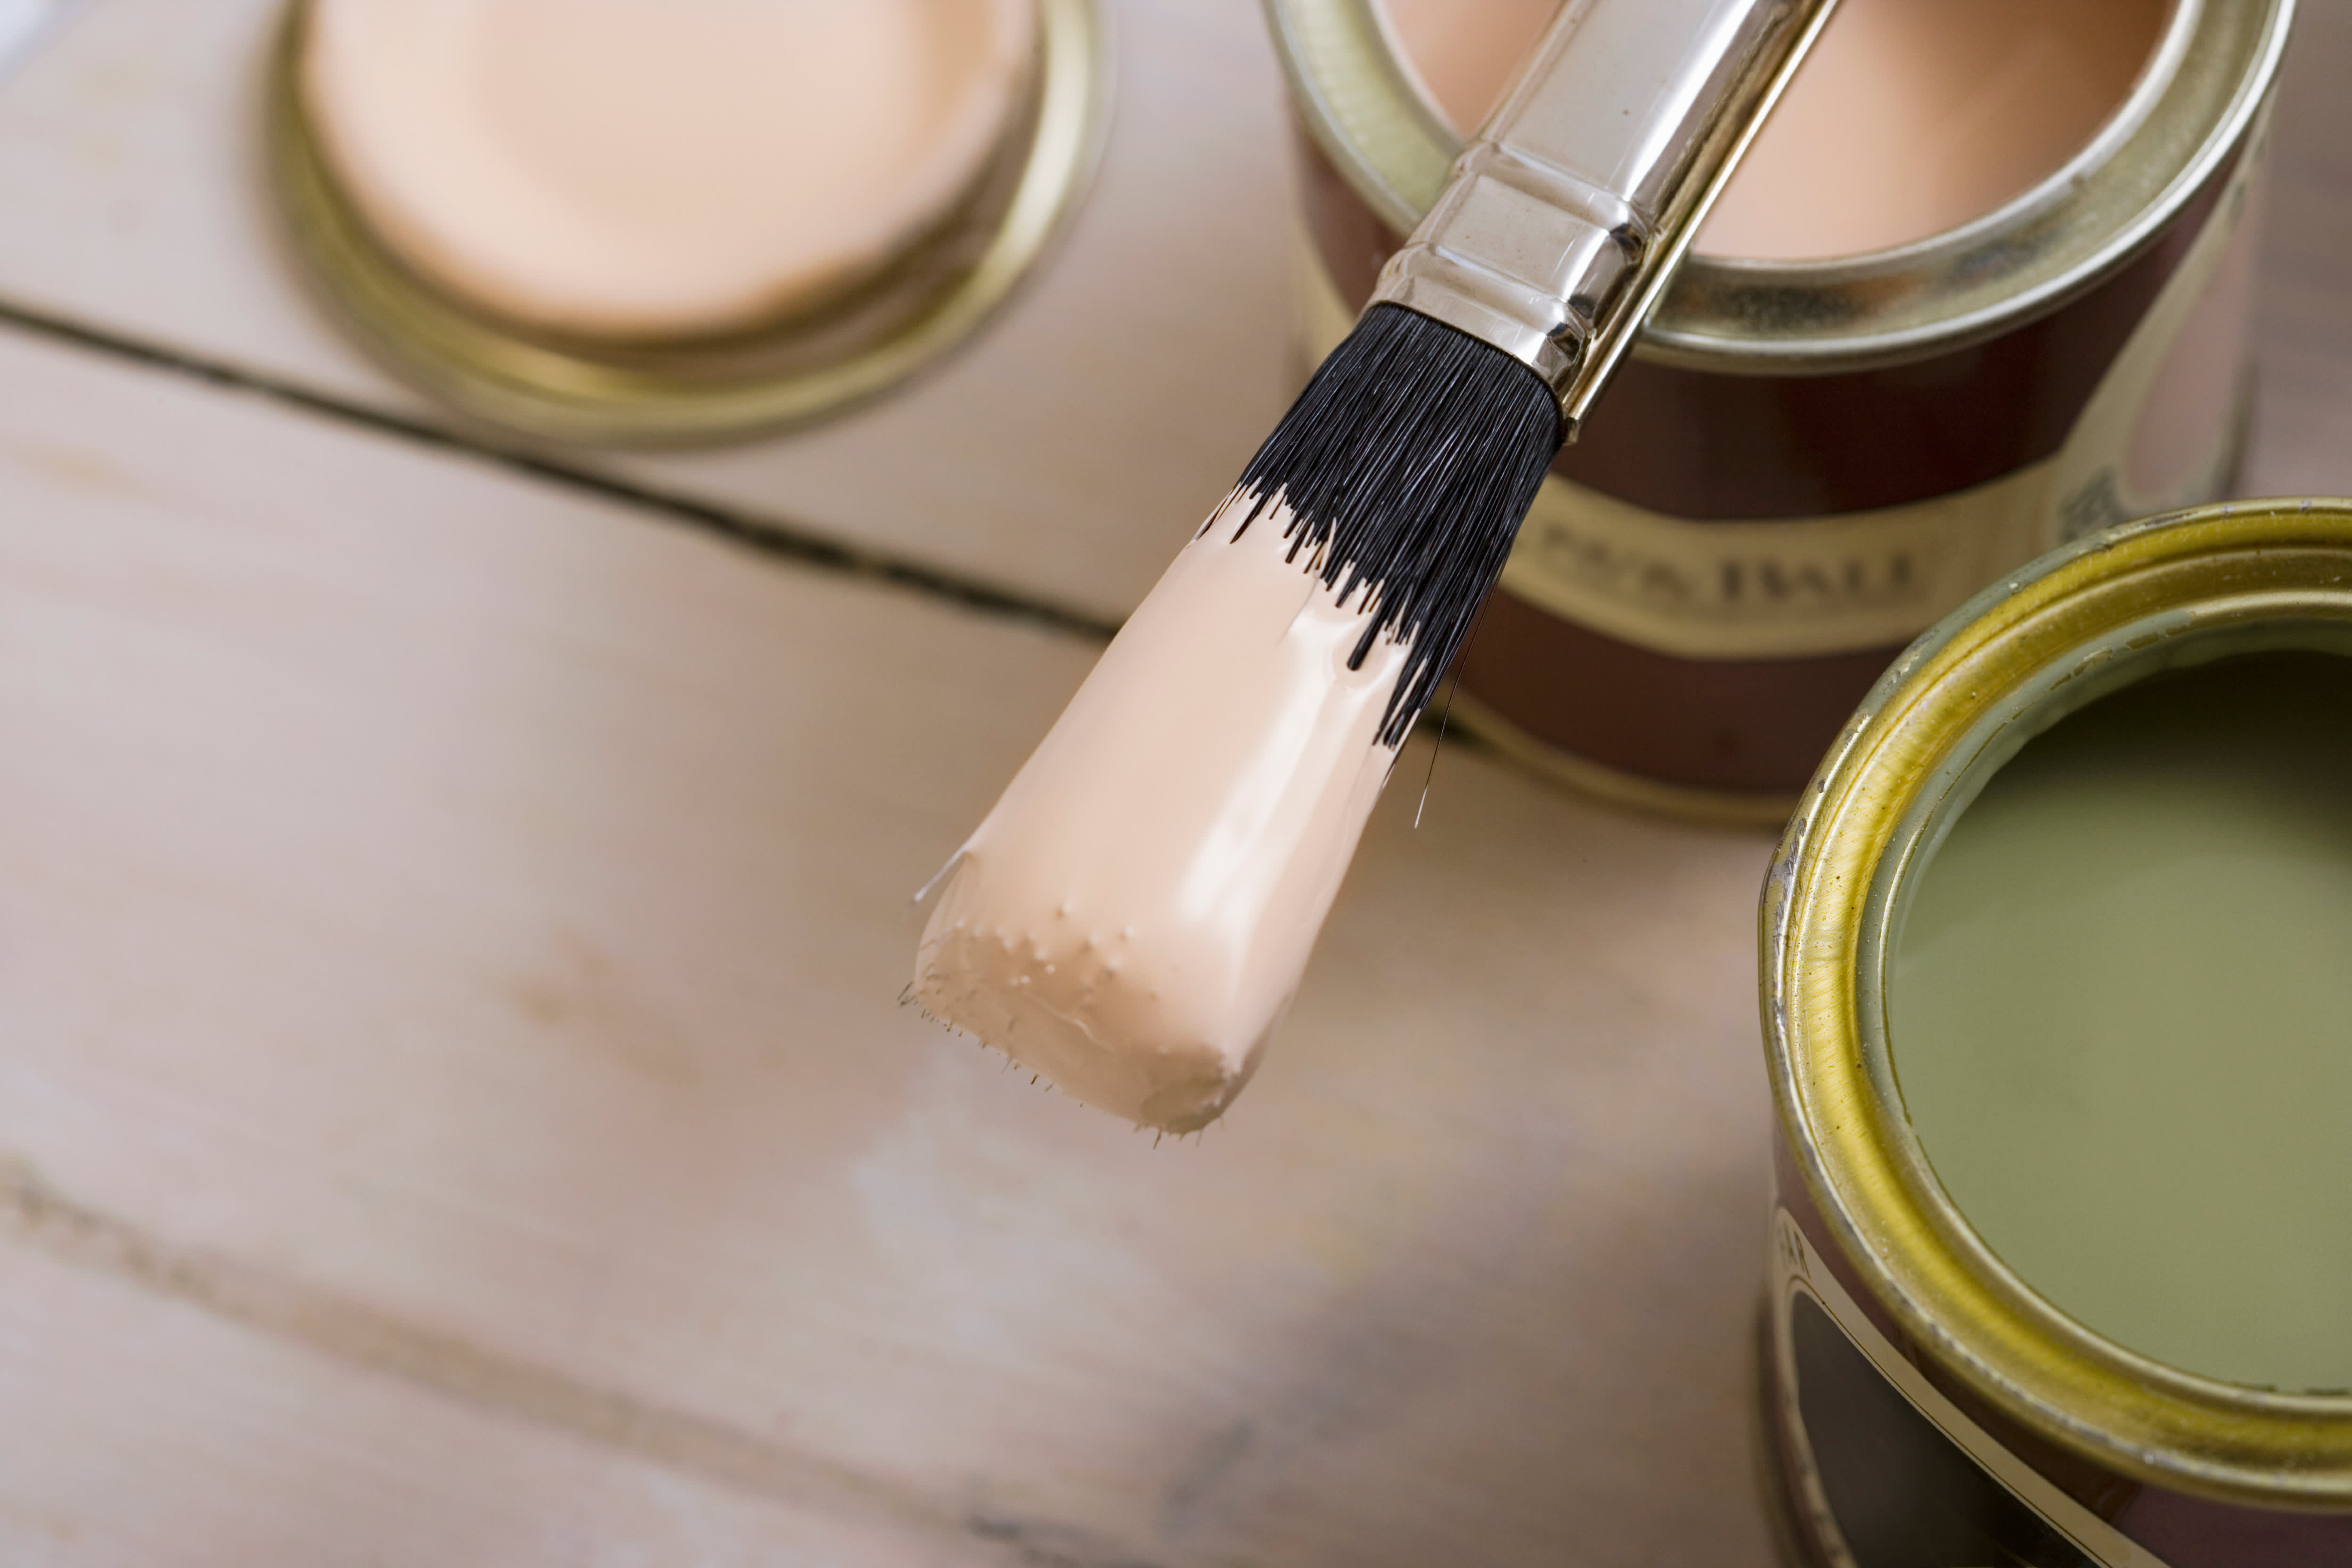 Farrow & Ball Paint Brush - 1 inch in Paint Brushes